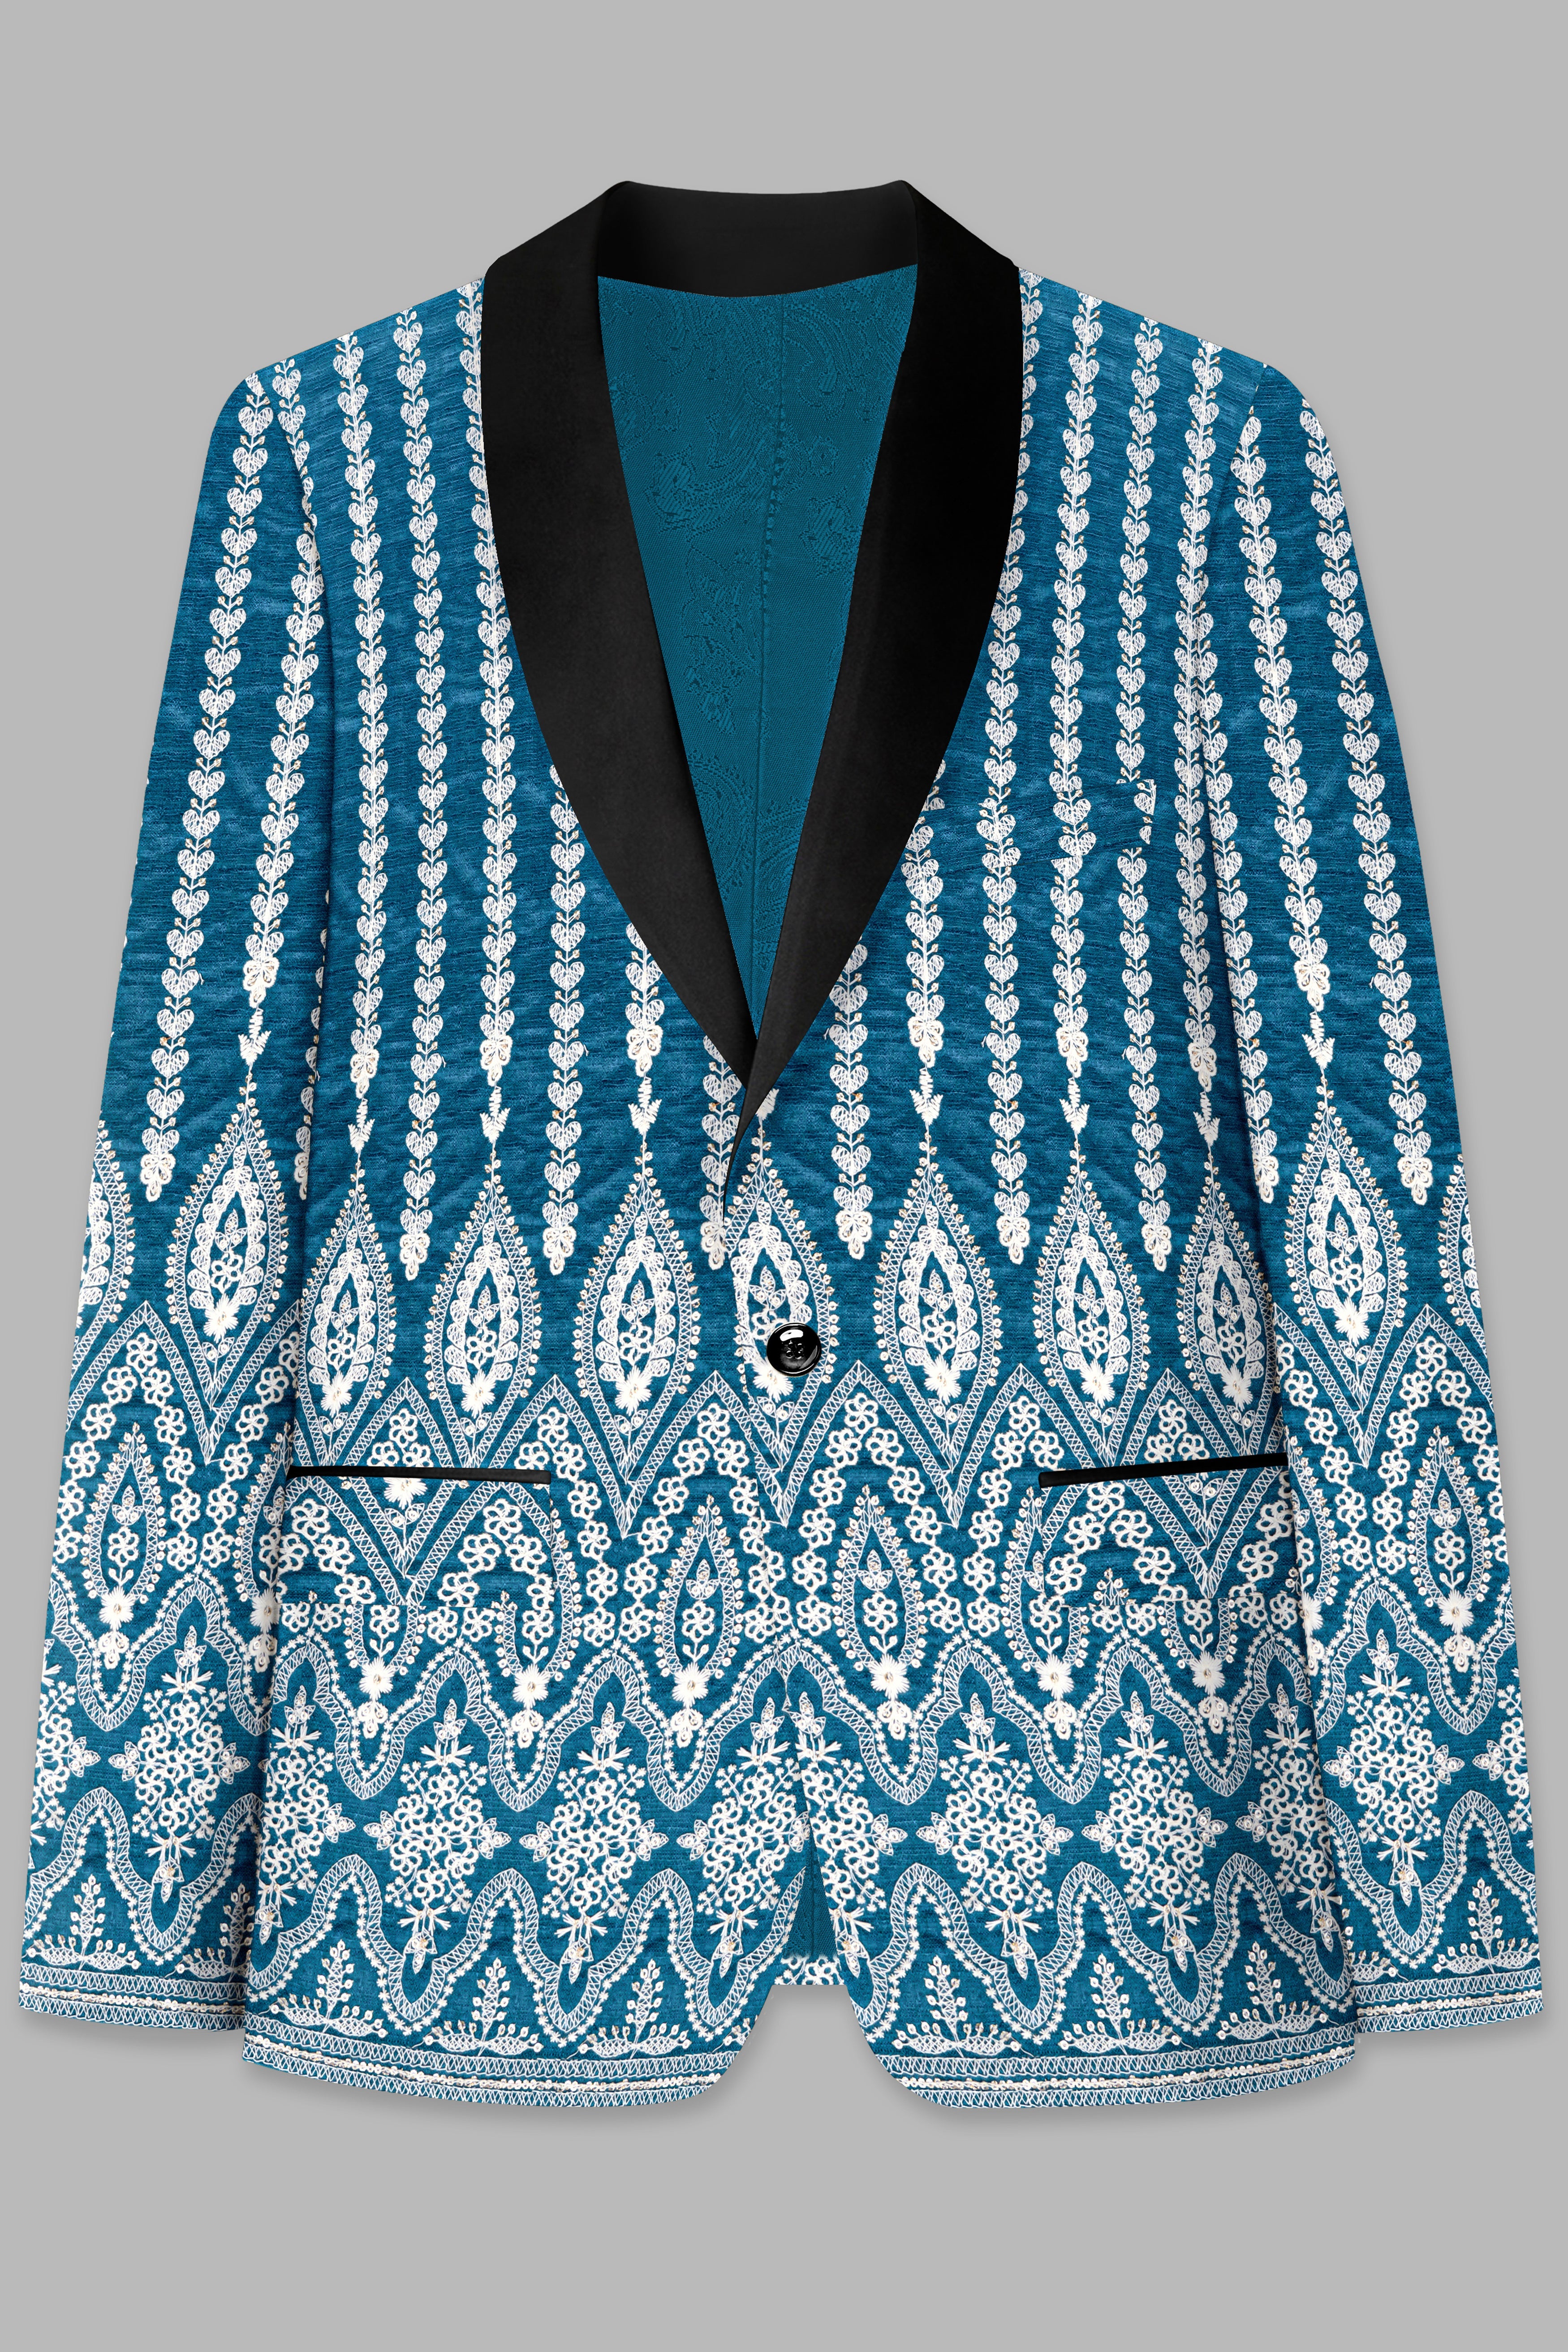 Cerulean Blue and White Thread Embroidered Tuxedo Blazer BL3720-BKL-36, BL3720-BKL-38, BL3720-BKL-40, BL3720-BKL-42, BL3720-BKL-44, BL3720-BKL-46, BL3720-BKL-48, BL3720-BKL-50, BL3720-BKL-52, BL3720-BKL-54, BL3720-BKL-56, BL3720-BKL-58, BL3720-BKL-60